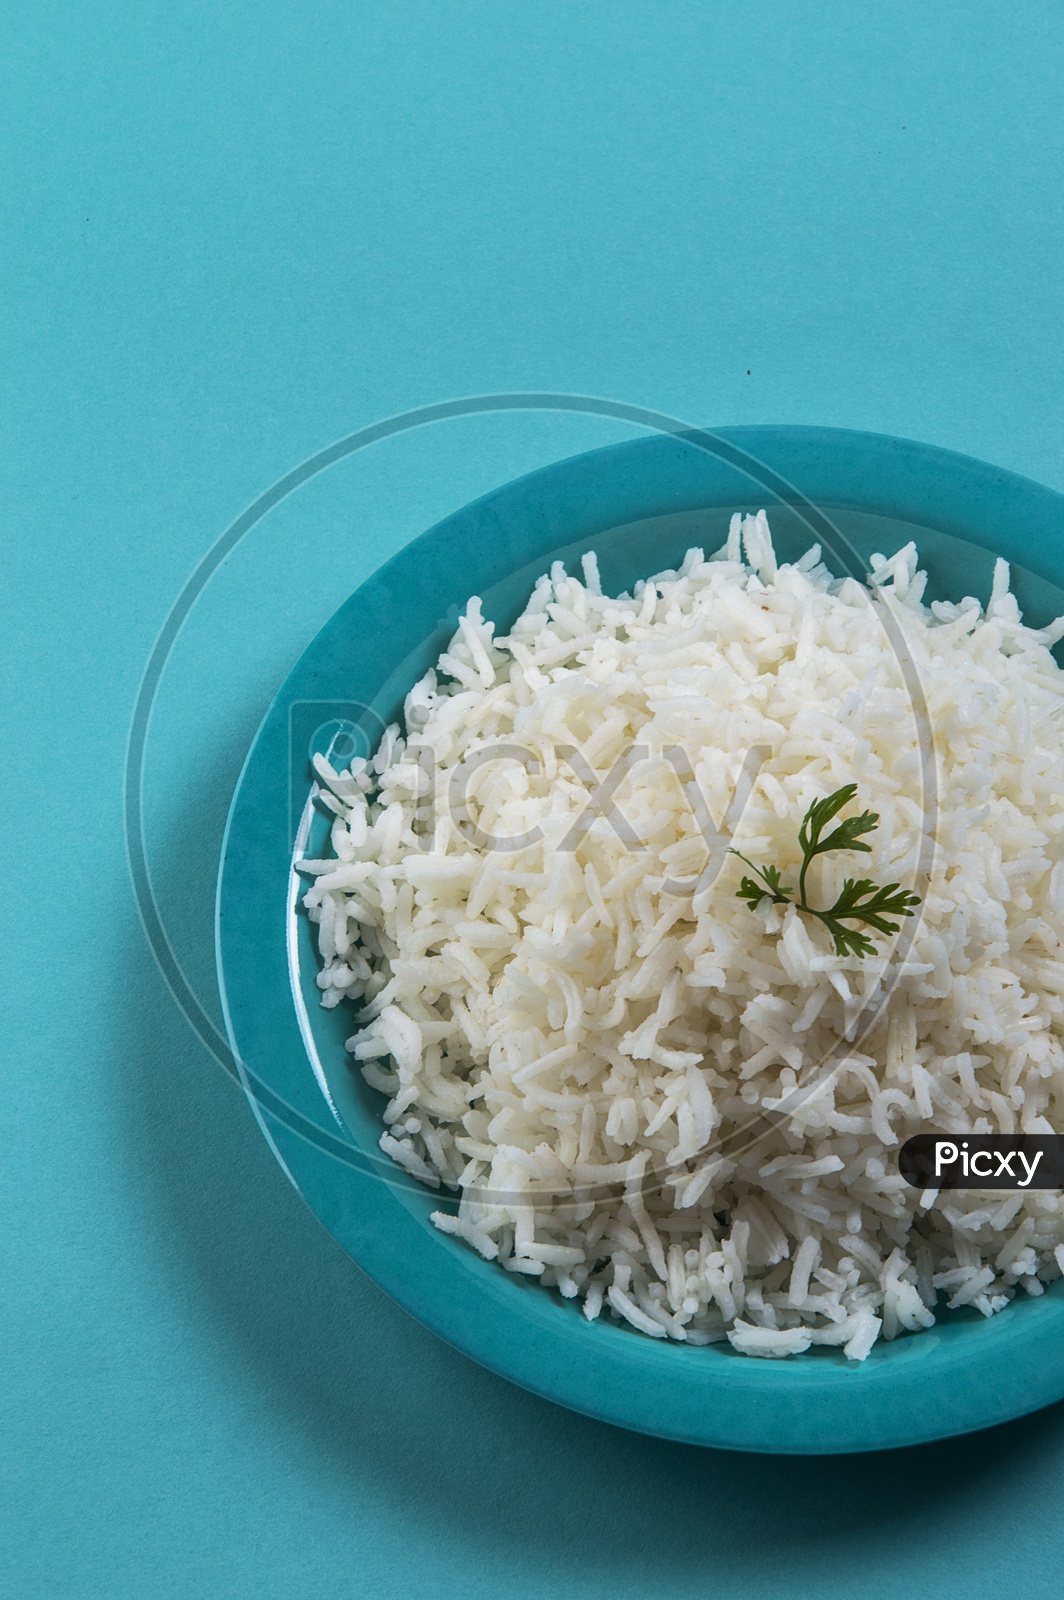 Cooked plain white basmati rice with coriander in a blue plate on blue background